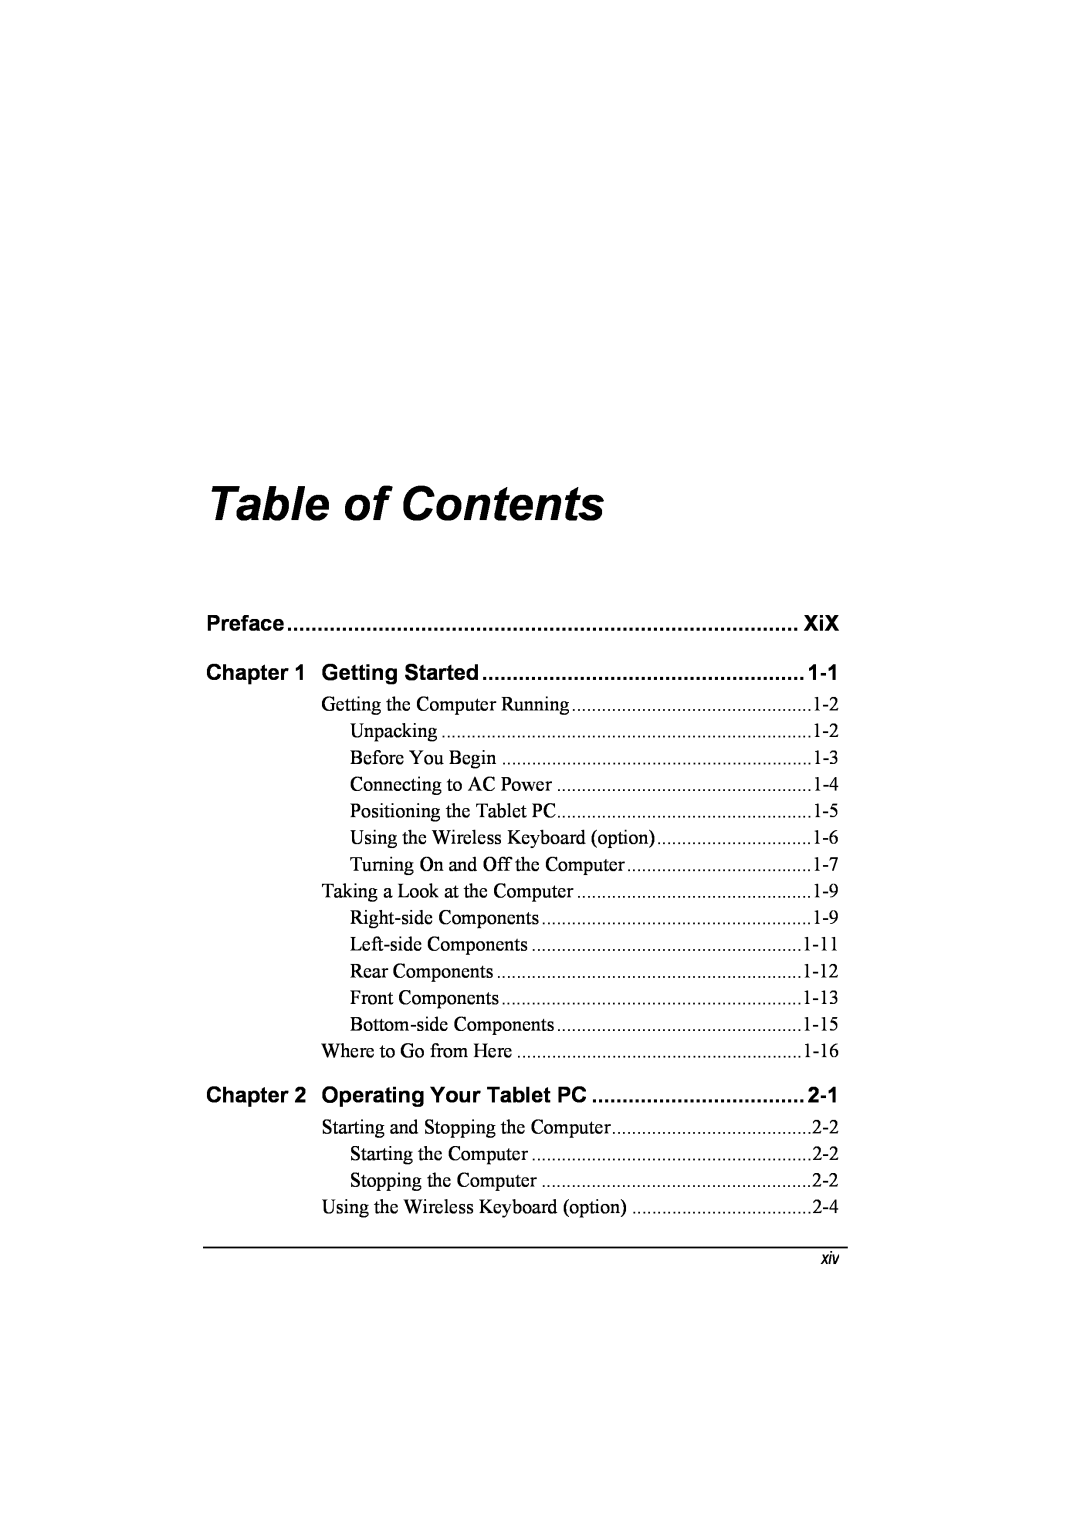 TAG 20 Series manual Table of Contents, Preface, Getting Started, Operating Your Tablet PC 